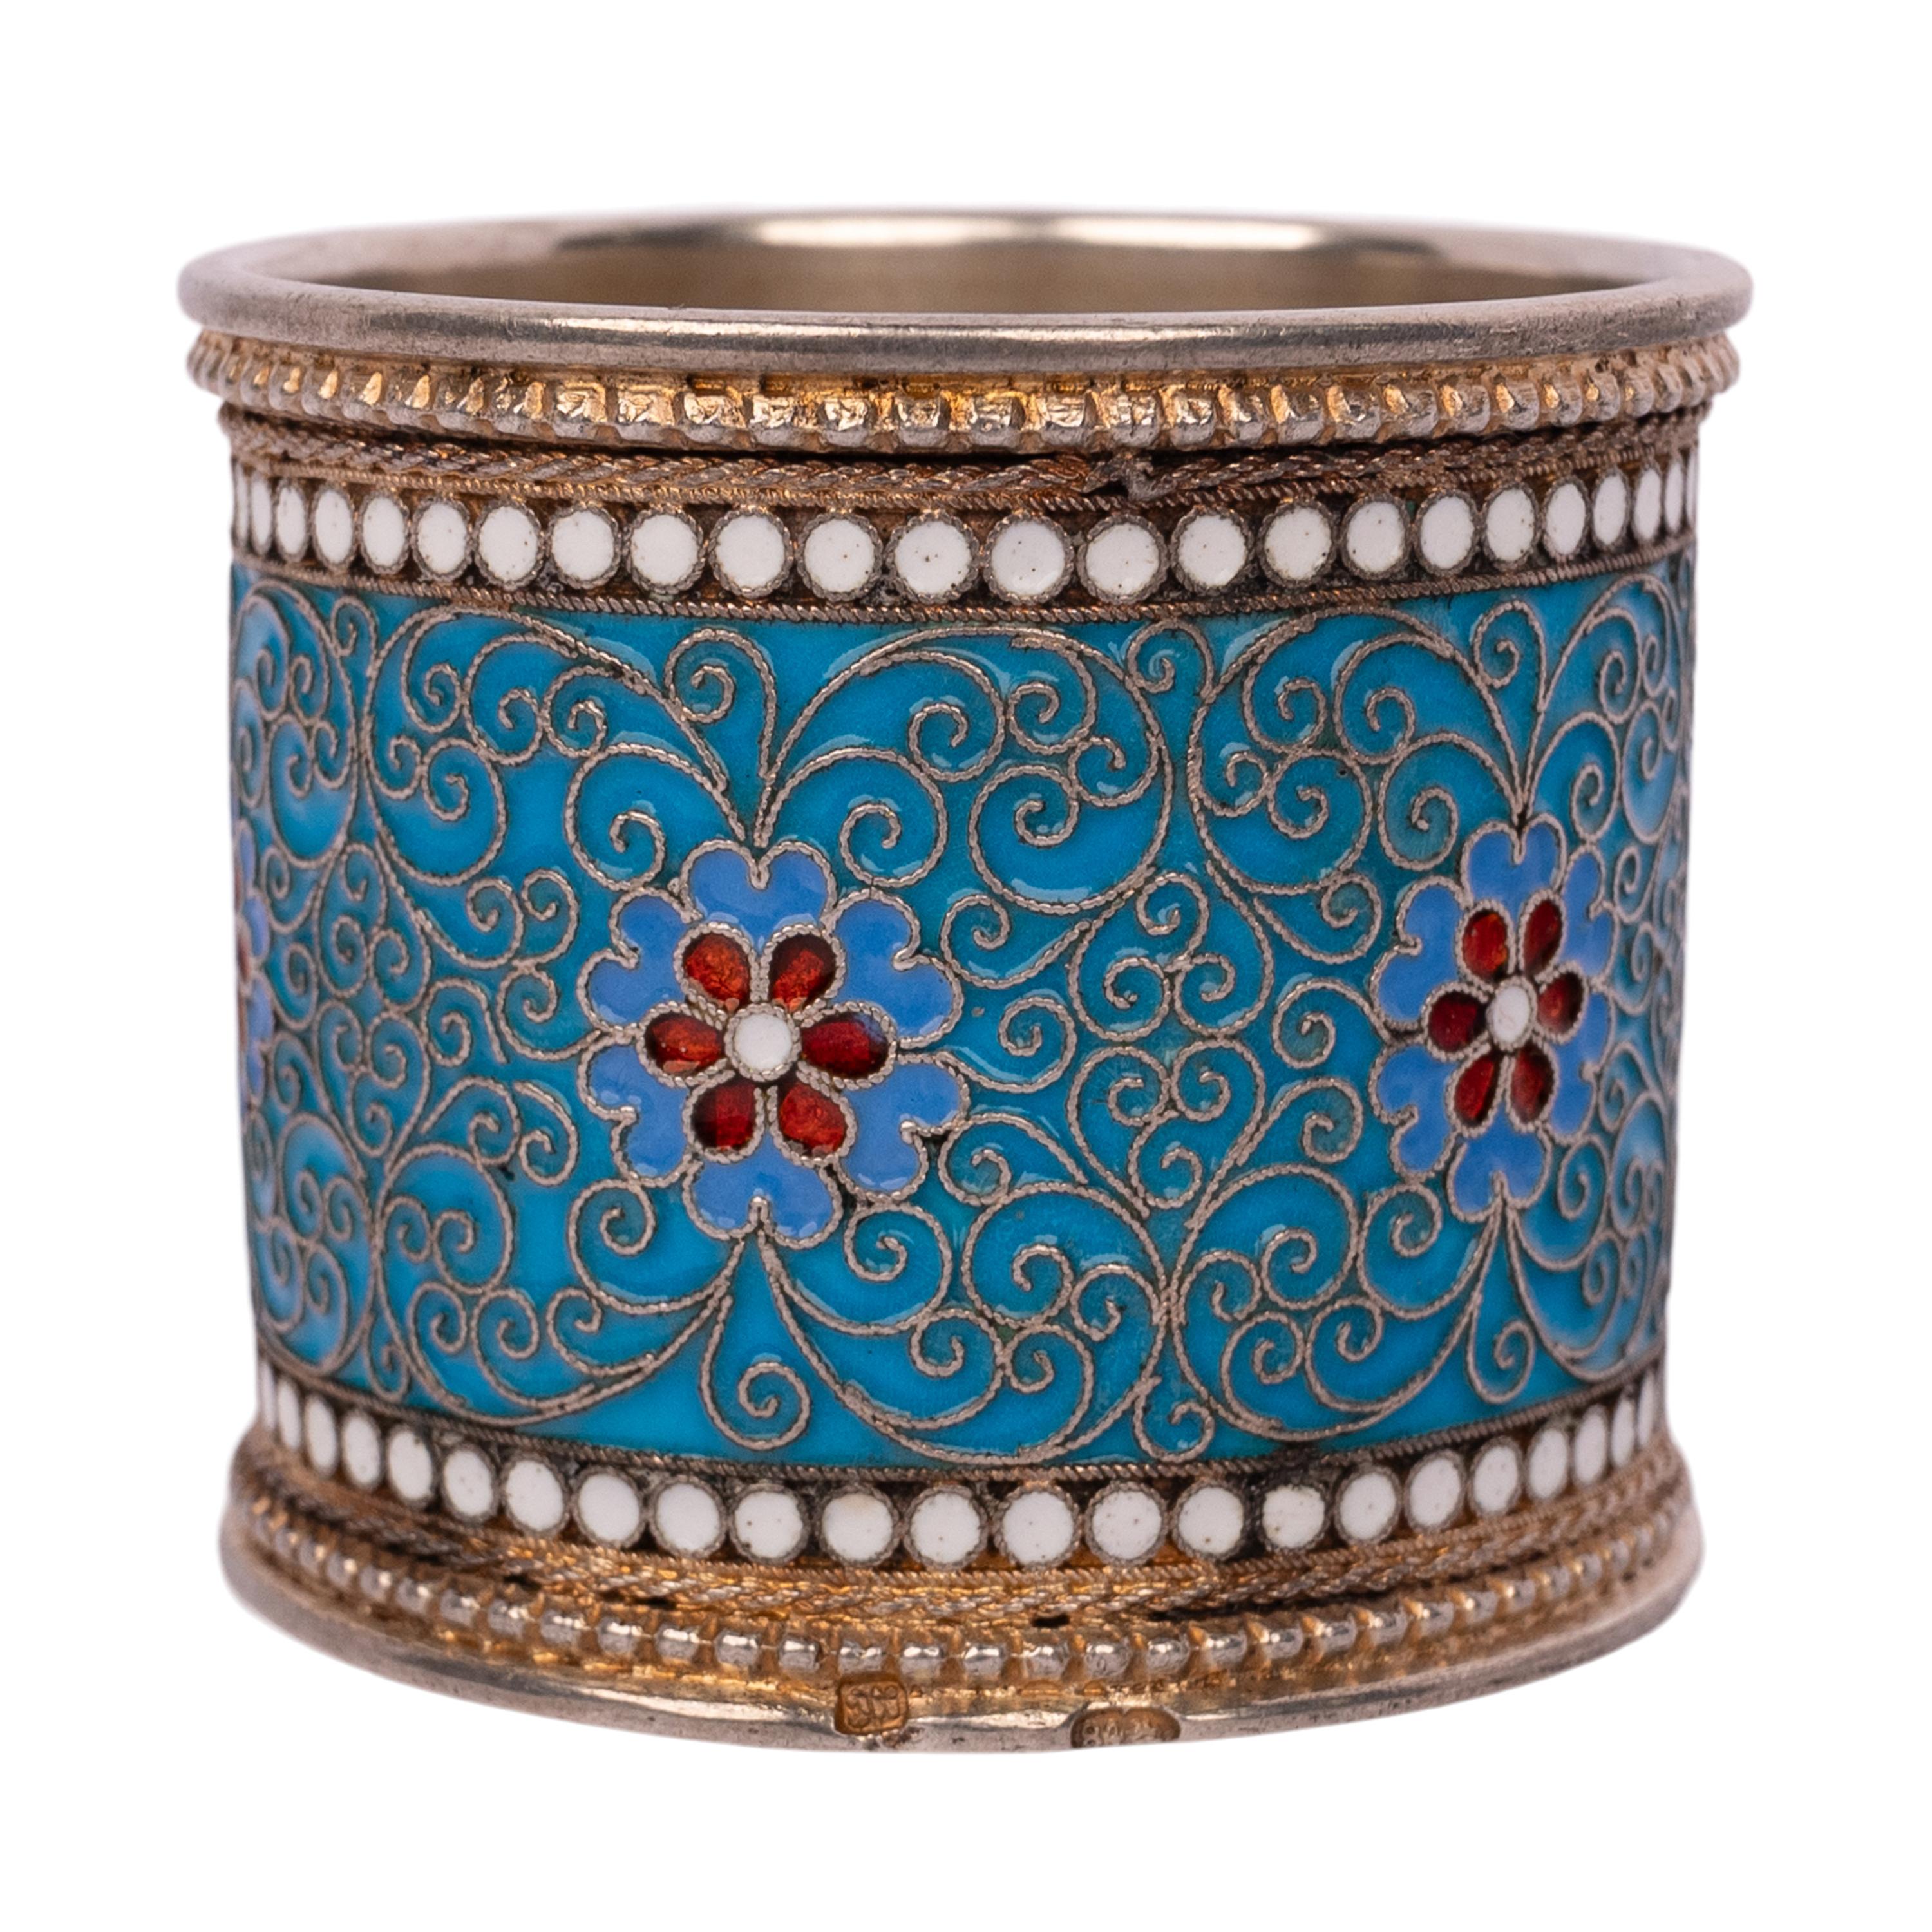 Cloissoné Antique Imperial Russian Silver Gold Cloisonne Enamel Napkin Ring Moscow 1896 For Sale